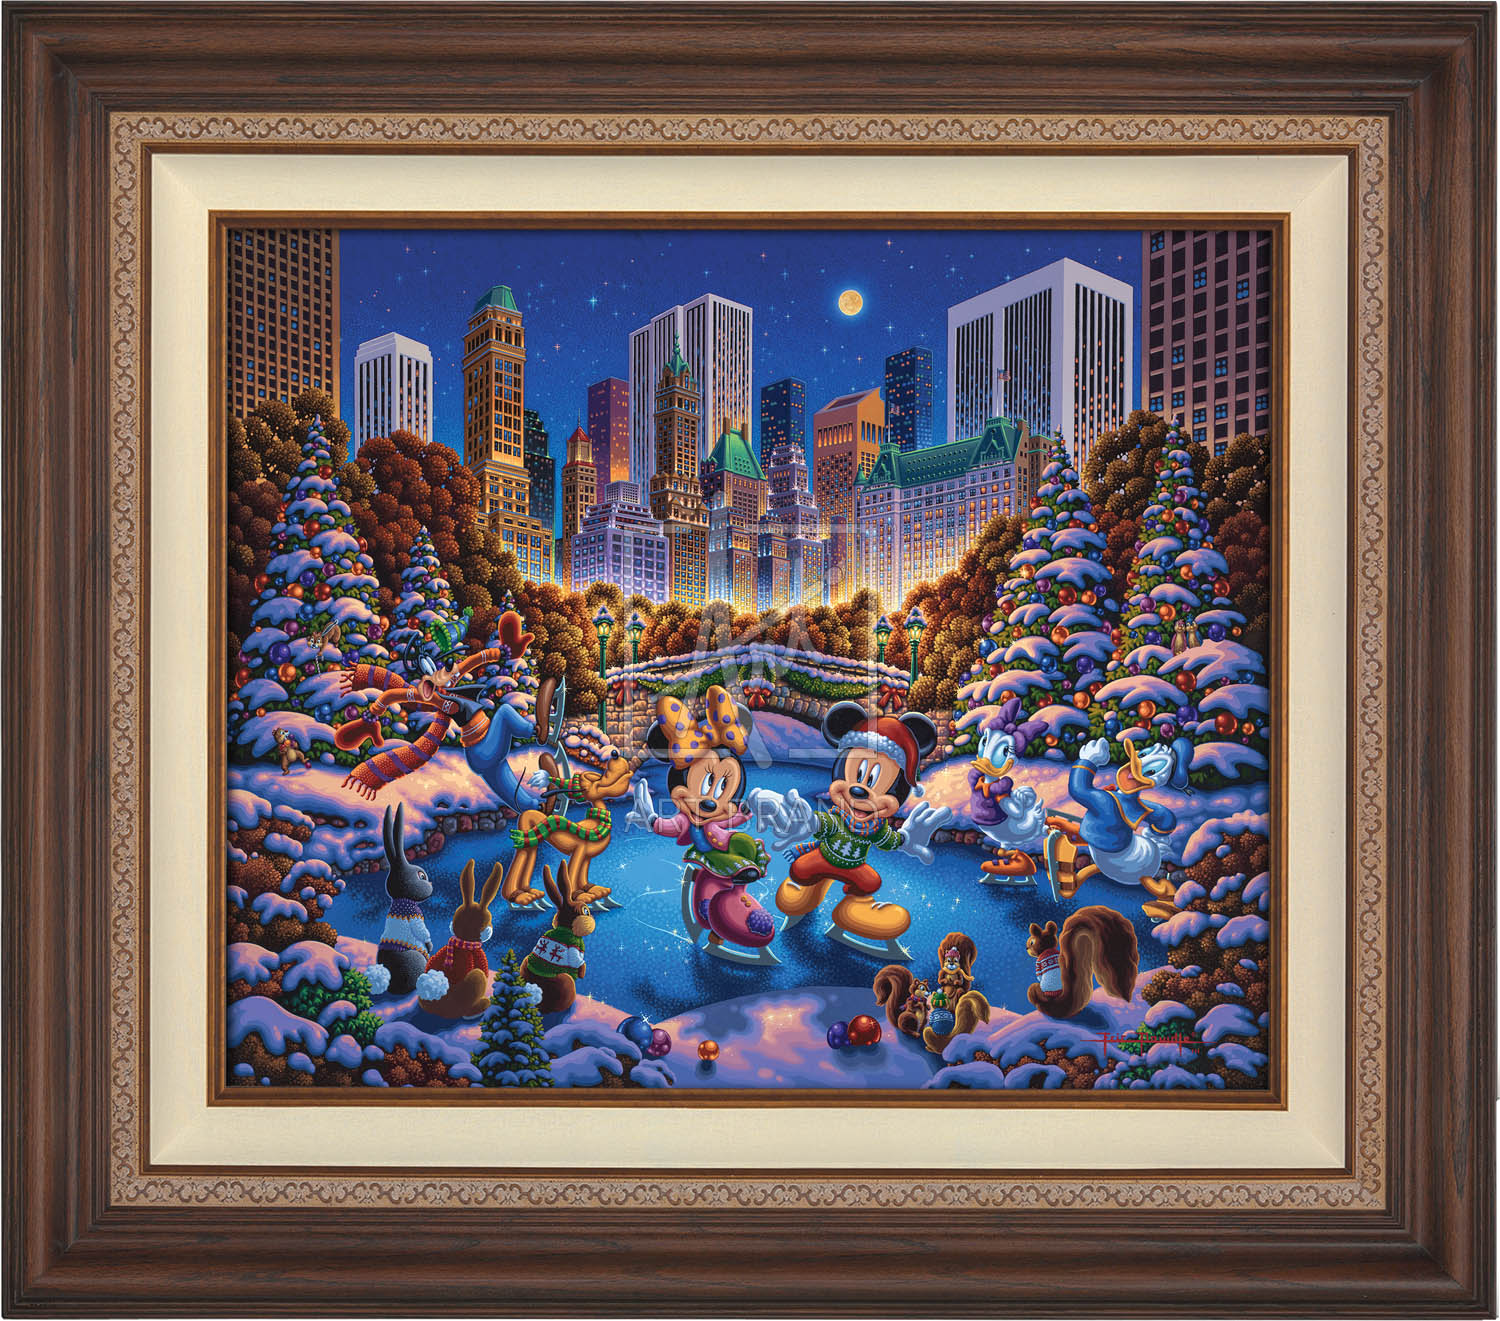 Mickey and Minnie dressed from head to toe in traditional holiday attire, as the enjoy evening skating with friends - Dark Walnut frame.